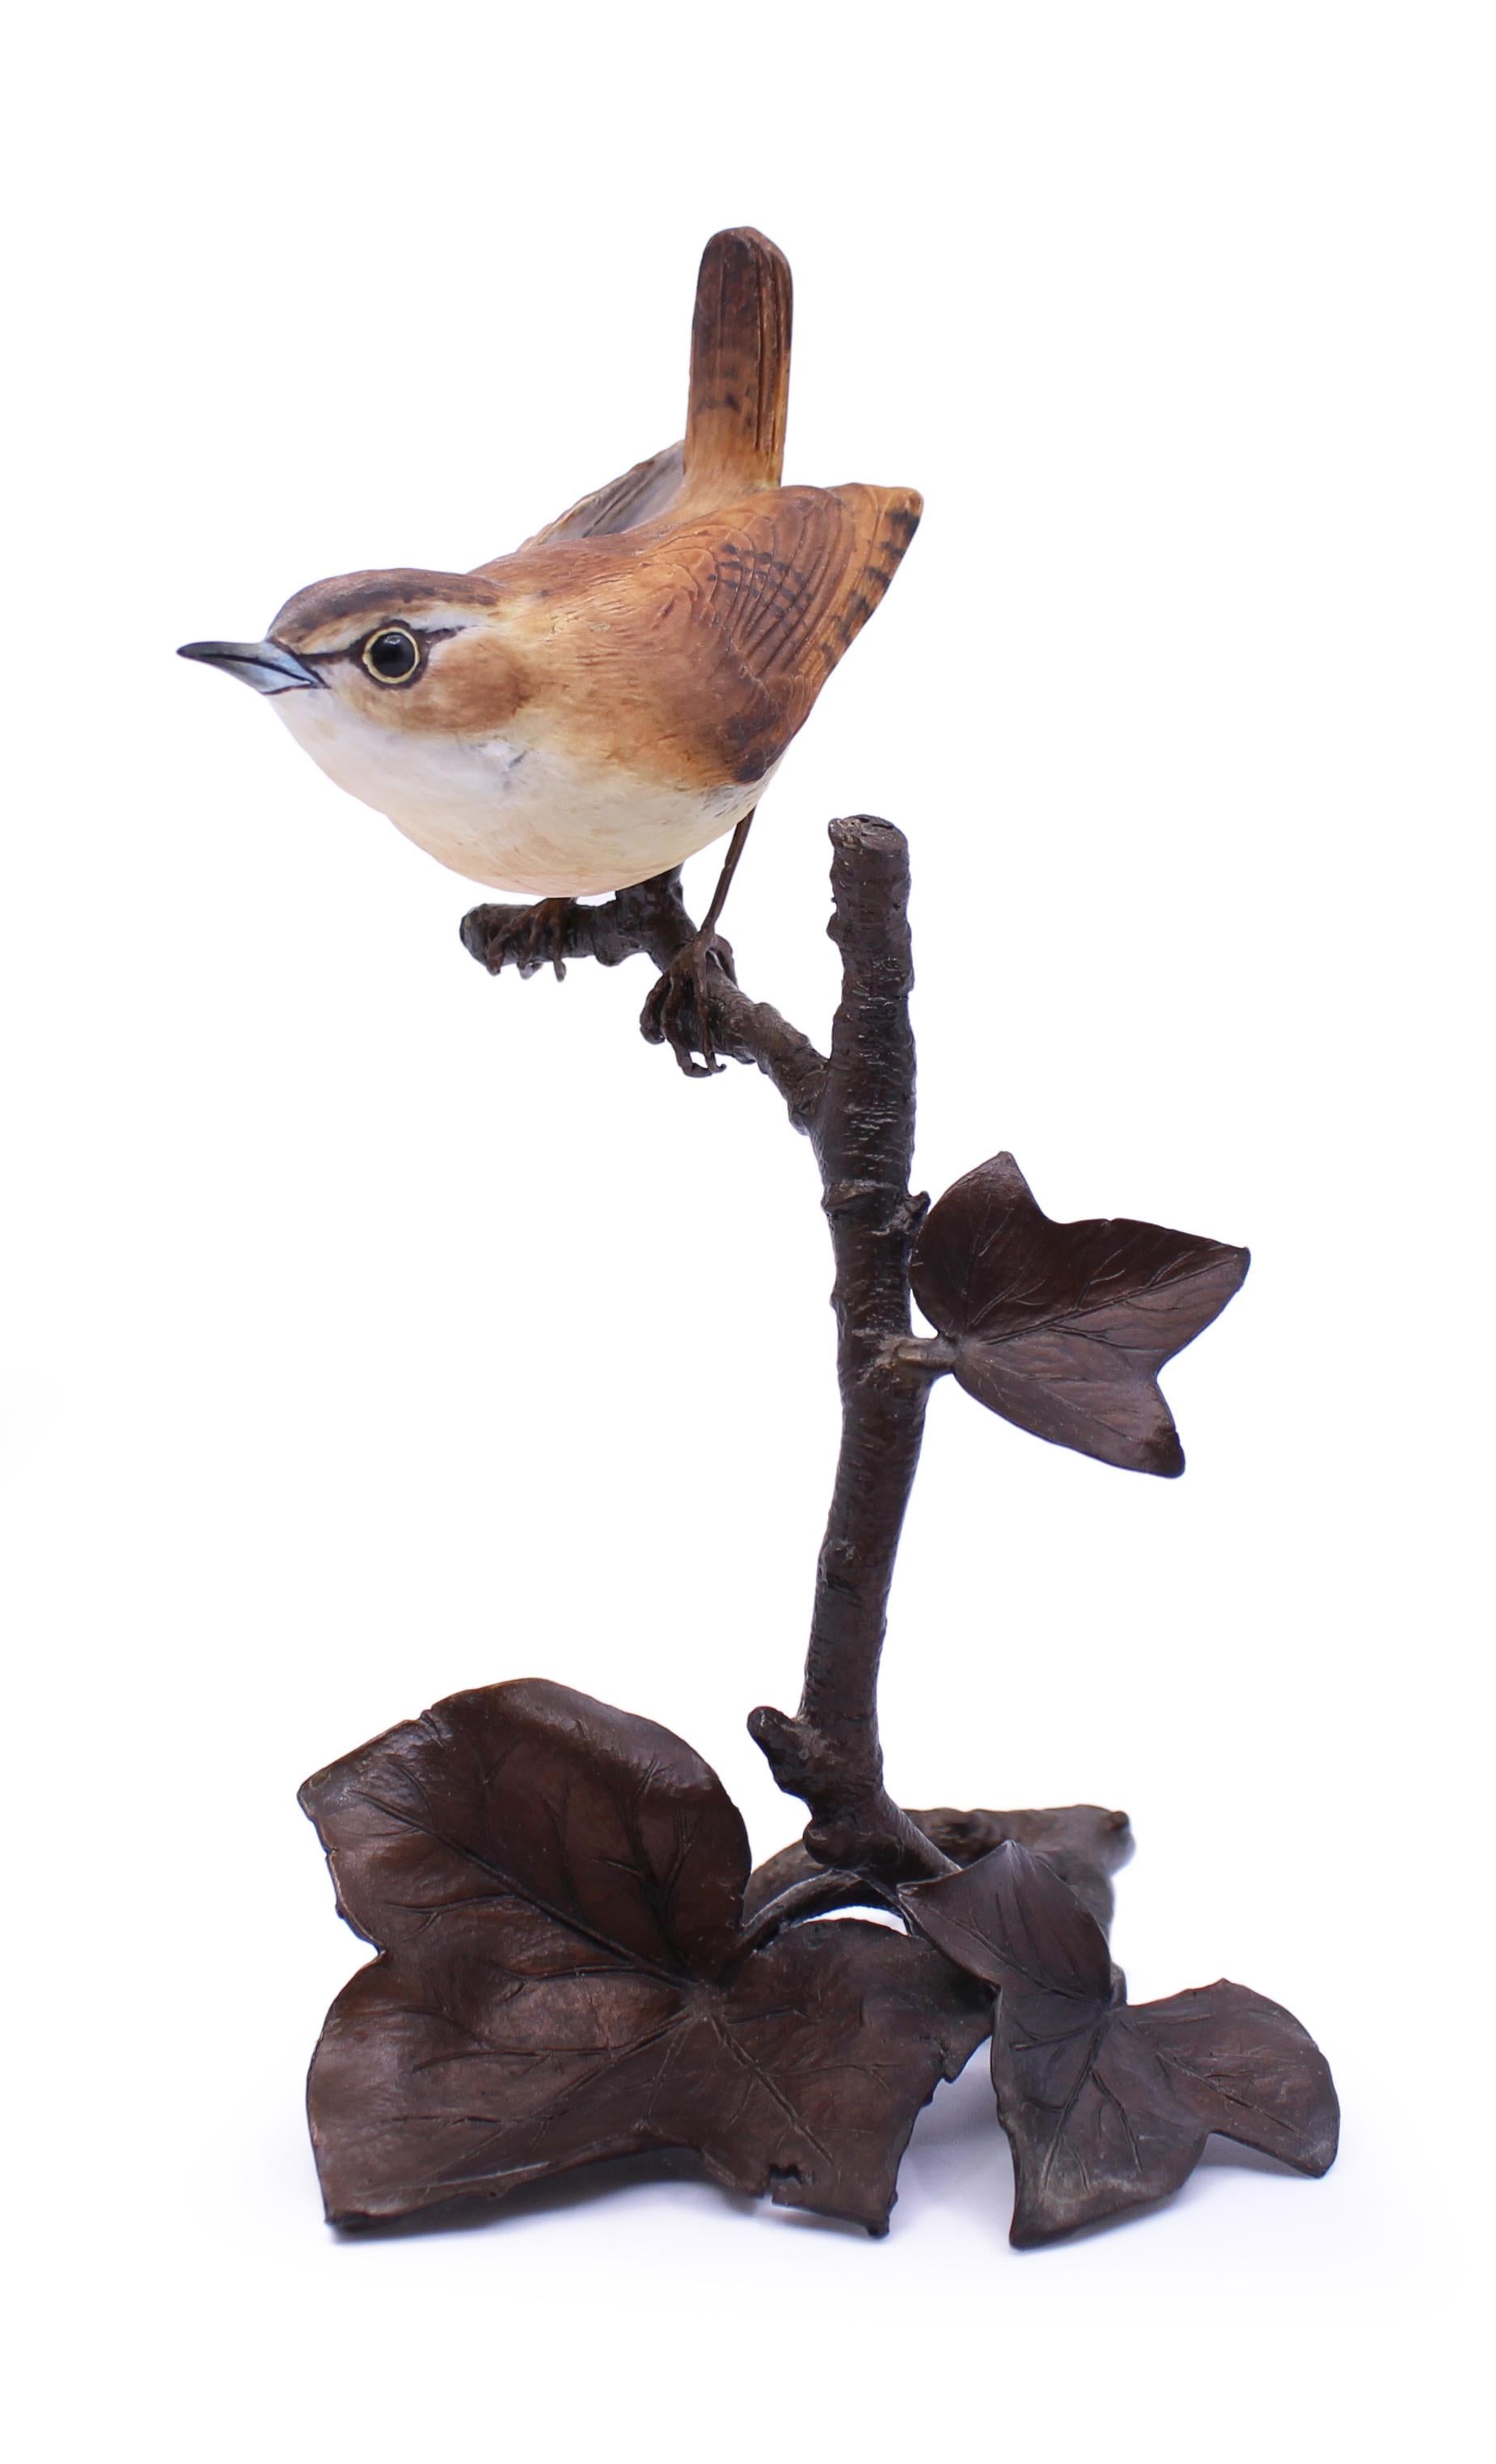 Albany Worcester porcelain & bronze wren
 

Manufacturer Albany Fine China Ltd England, Worcester

Series County Birds

Wren

Measures: Height 16 cm / 6 1/4 in

Very good condition; free from chips, cracks or repairs.

     